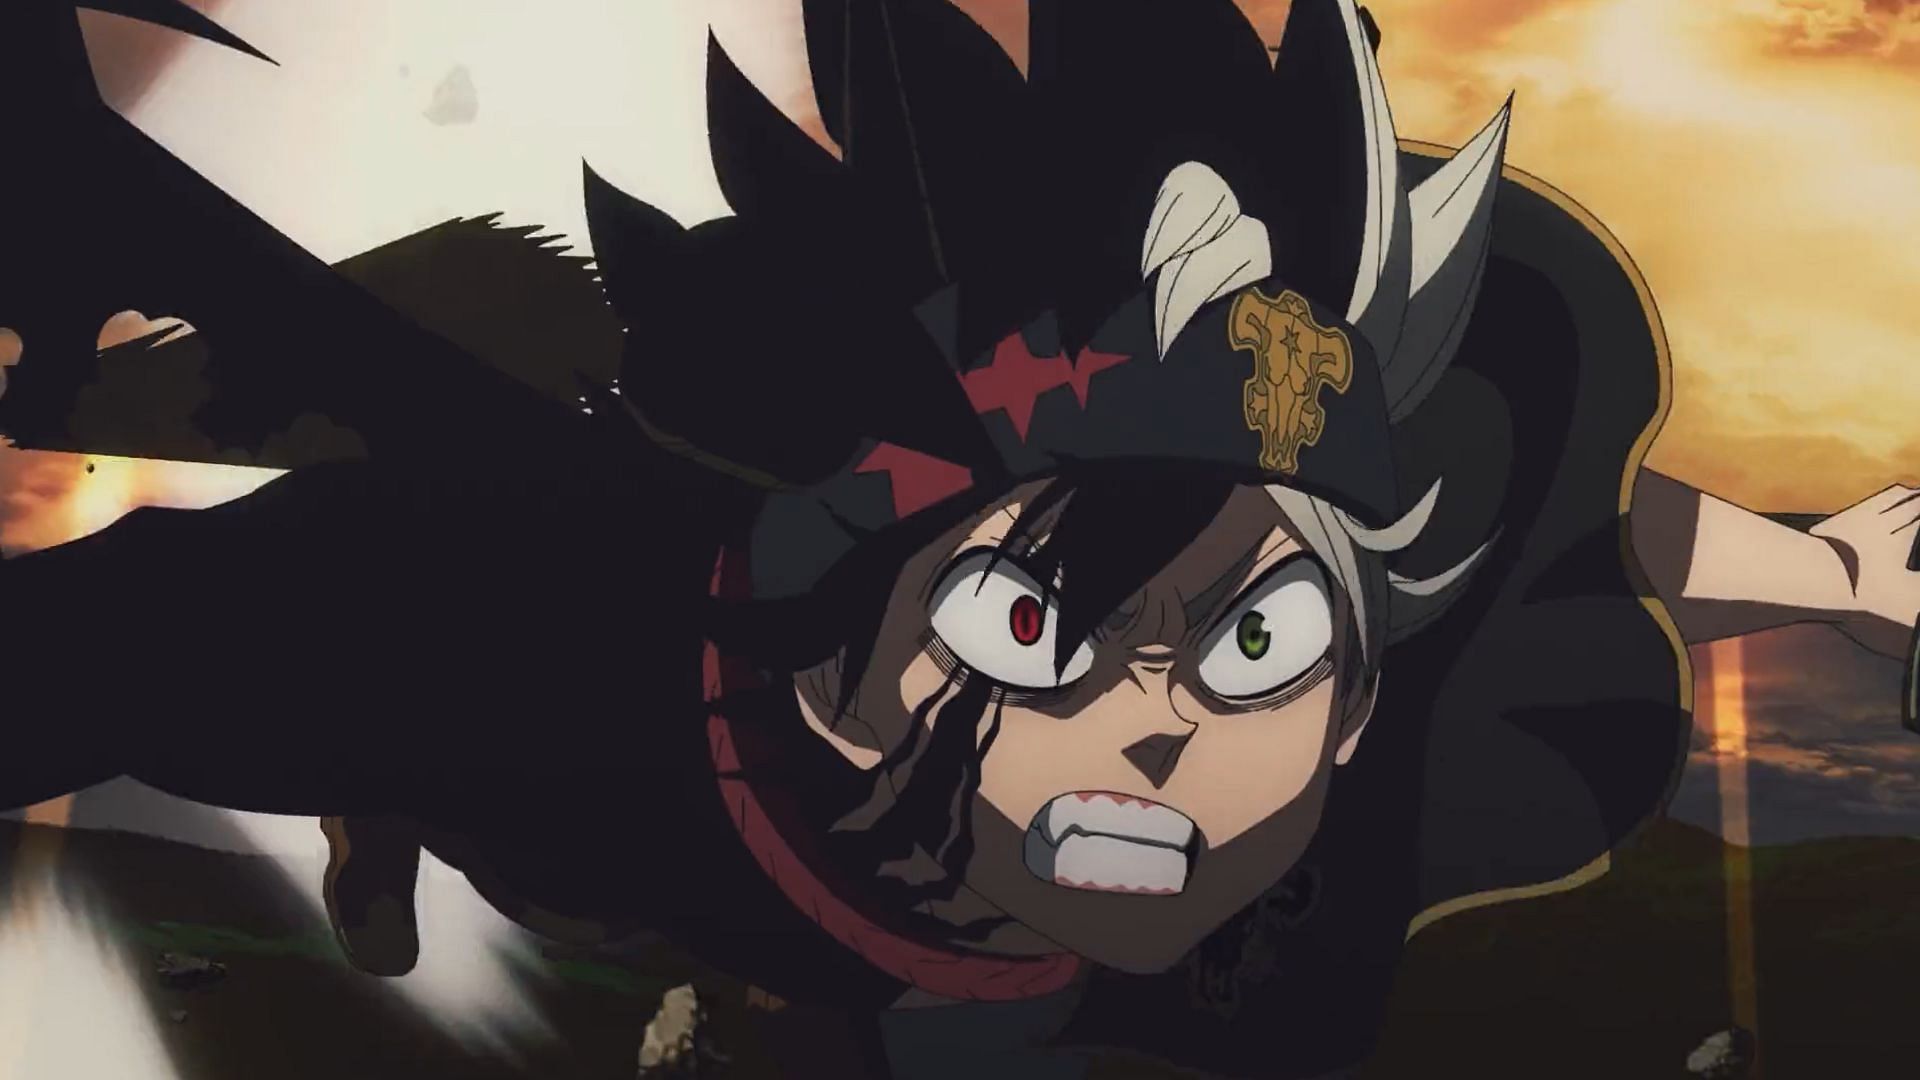 The Black Clover movie may have set back the anime's return